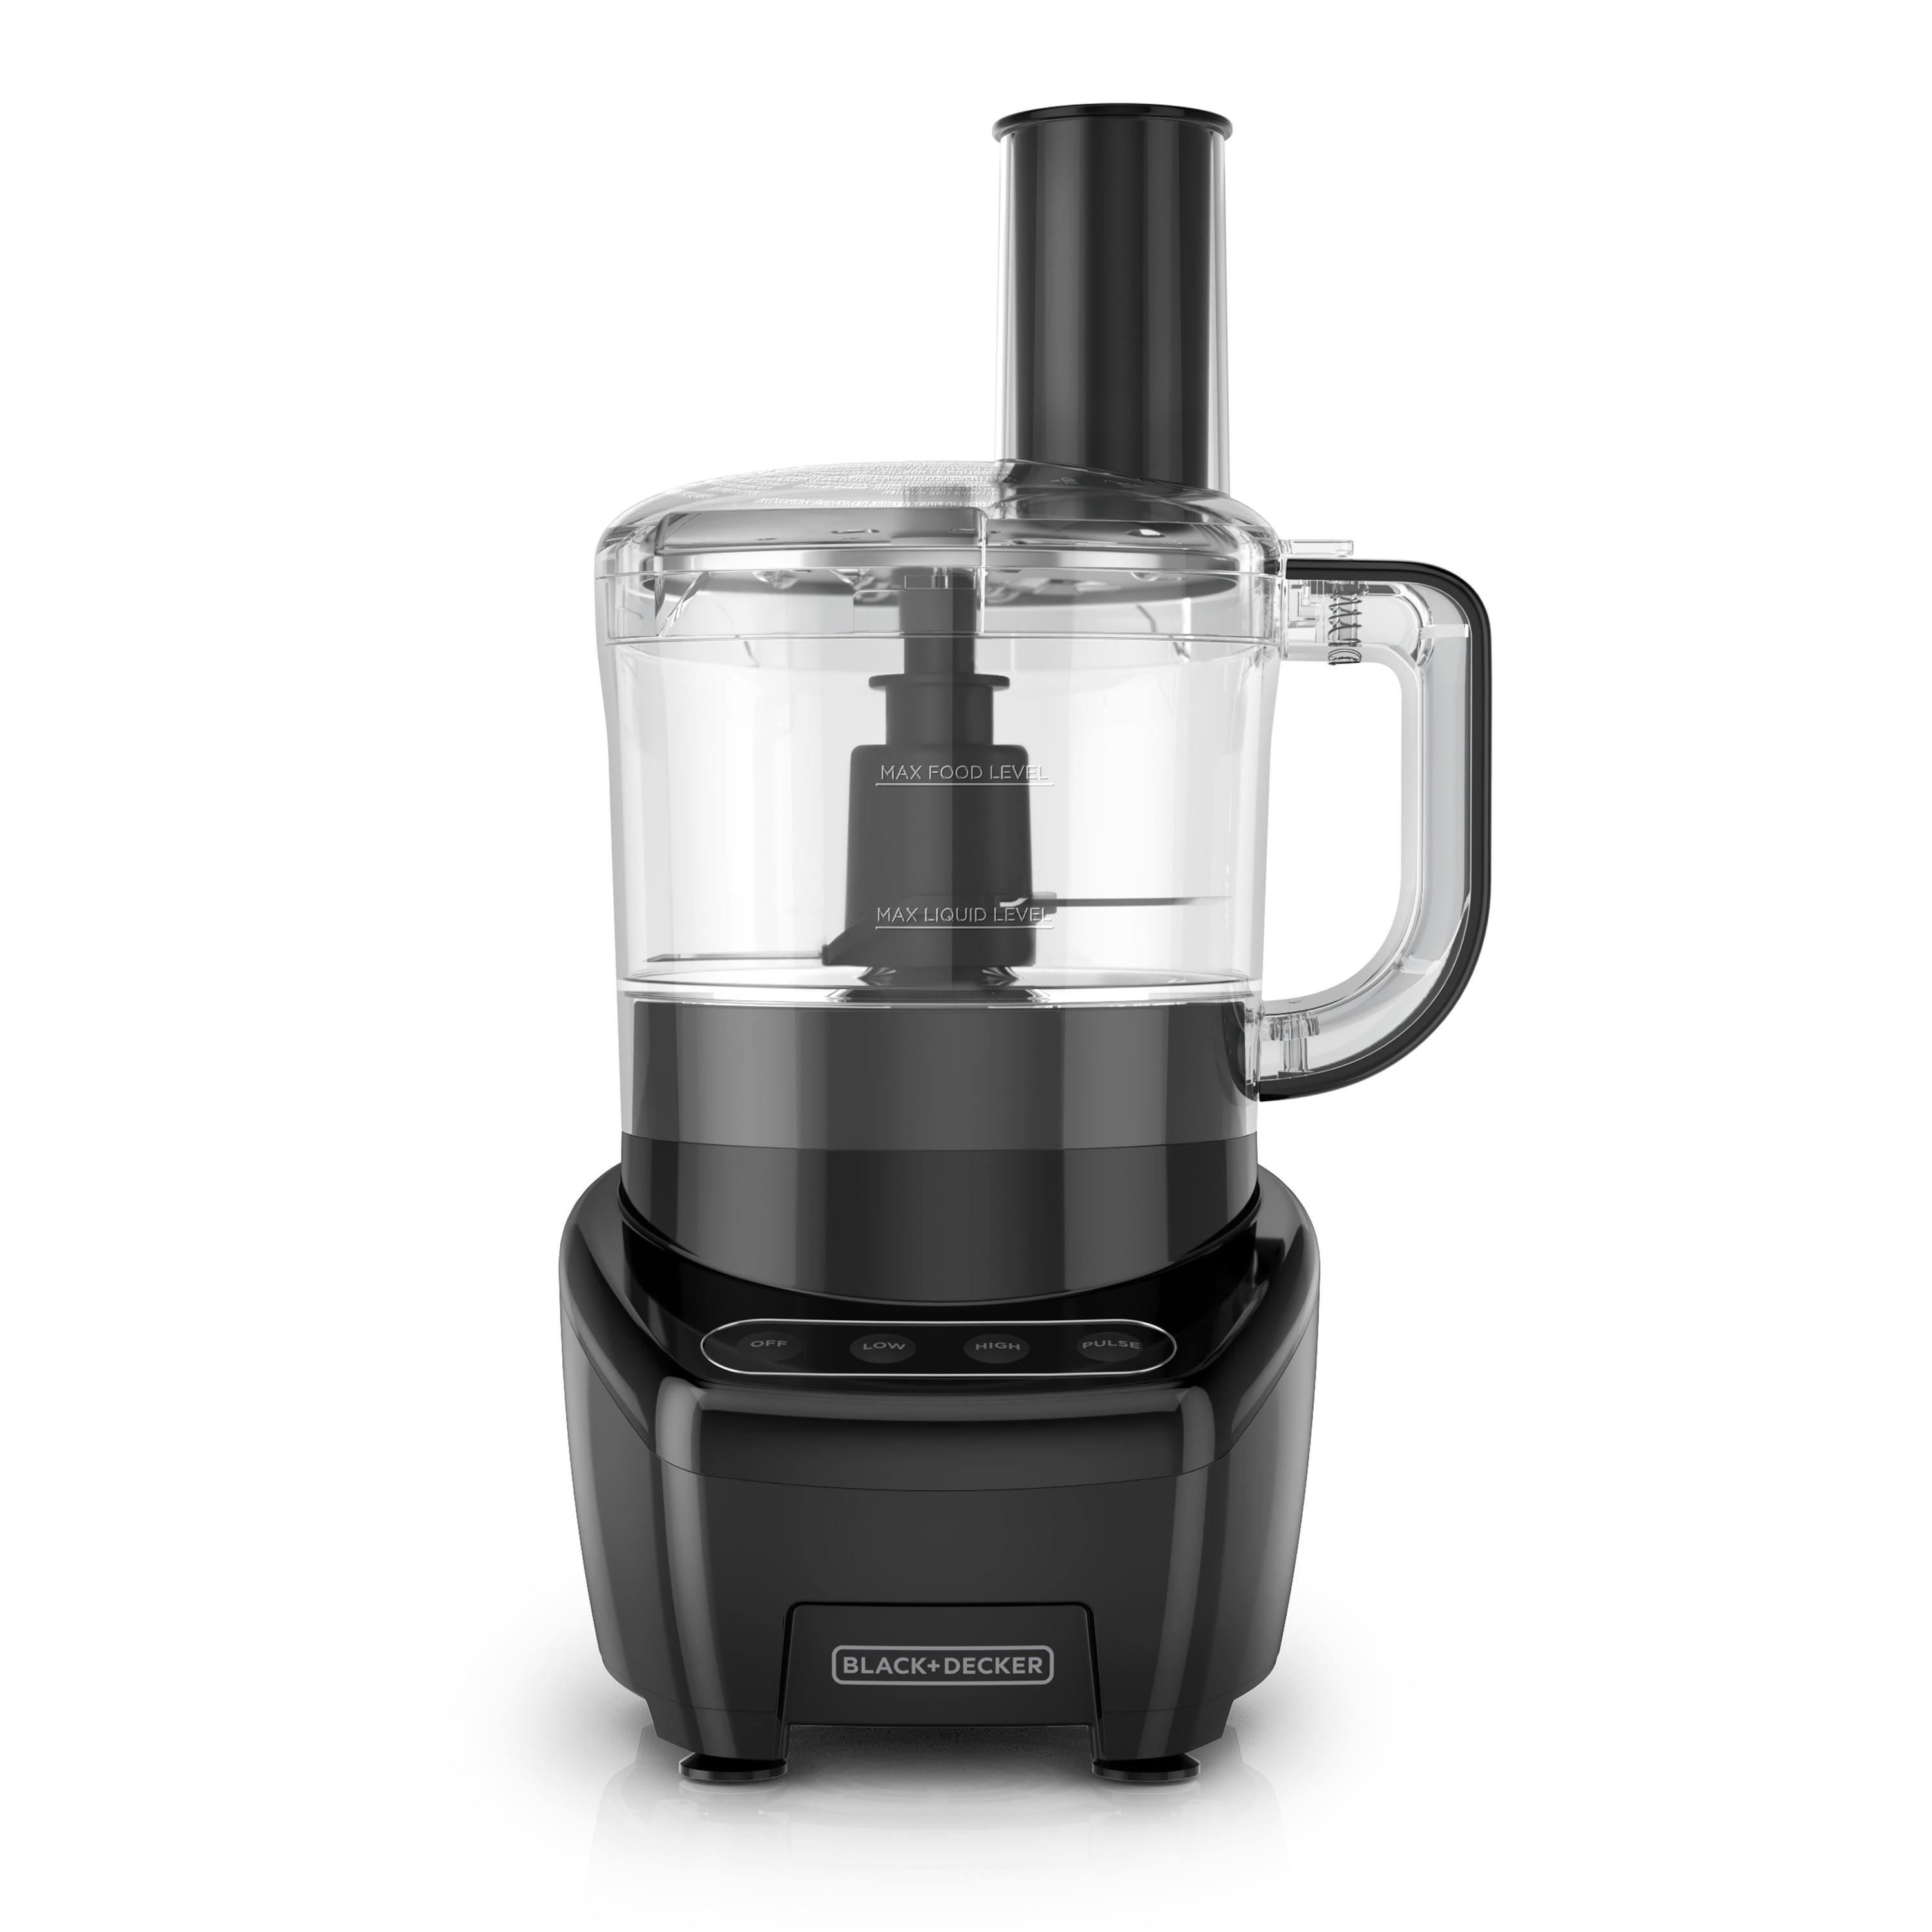 BLACK+DECKER Appliances - Add a smile to your Monday! ​ ​ Create a  post-workout smoothie, or treat yourself to a refreshing mid-day snack. The  BLACK+DECKER™ Quiet Blender gives you the power to